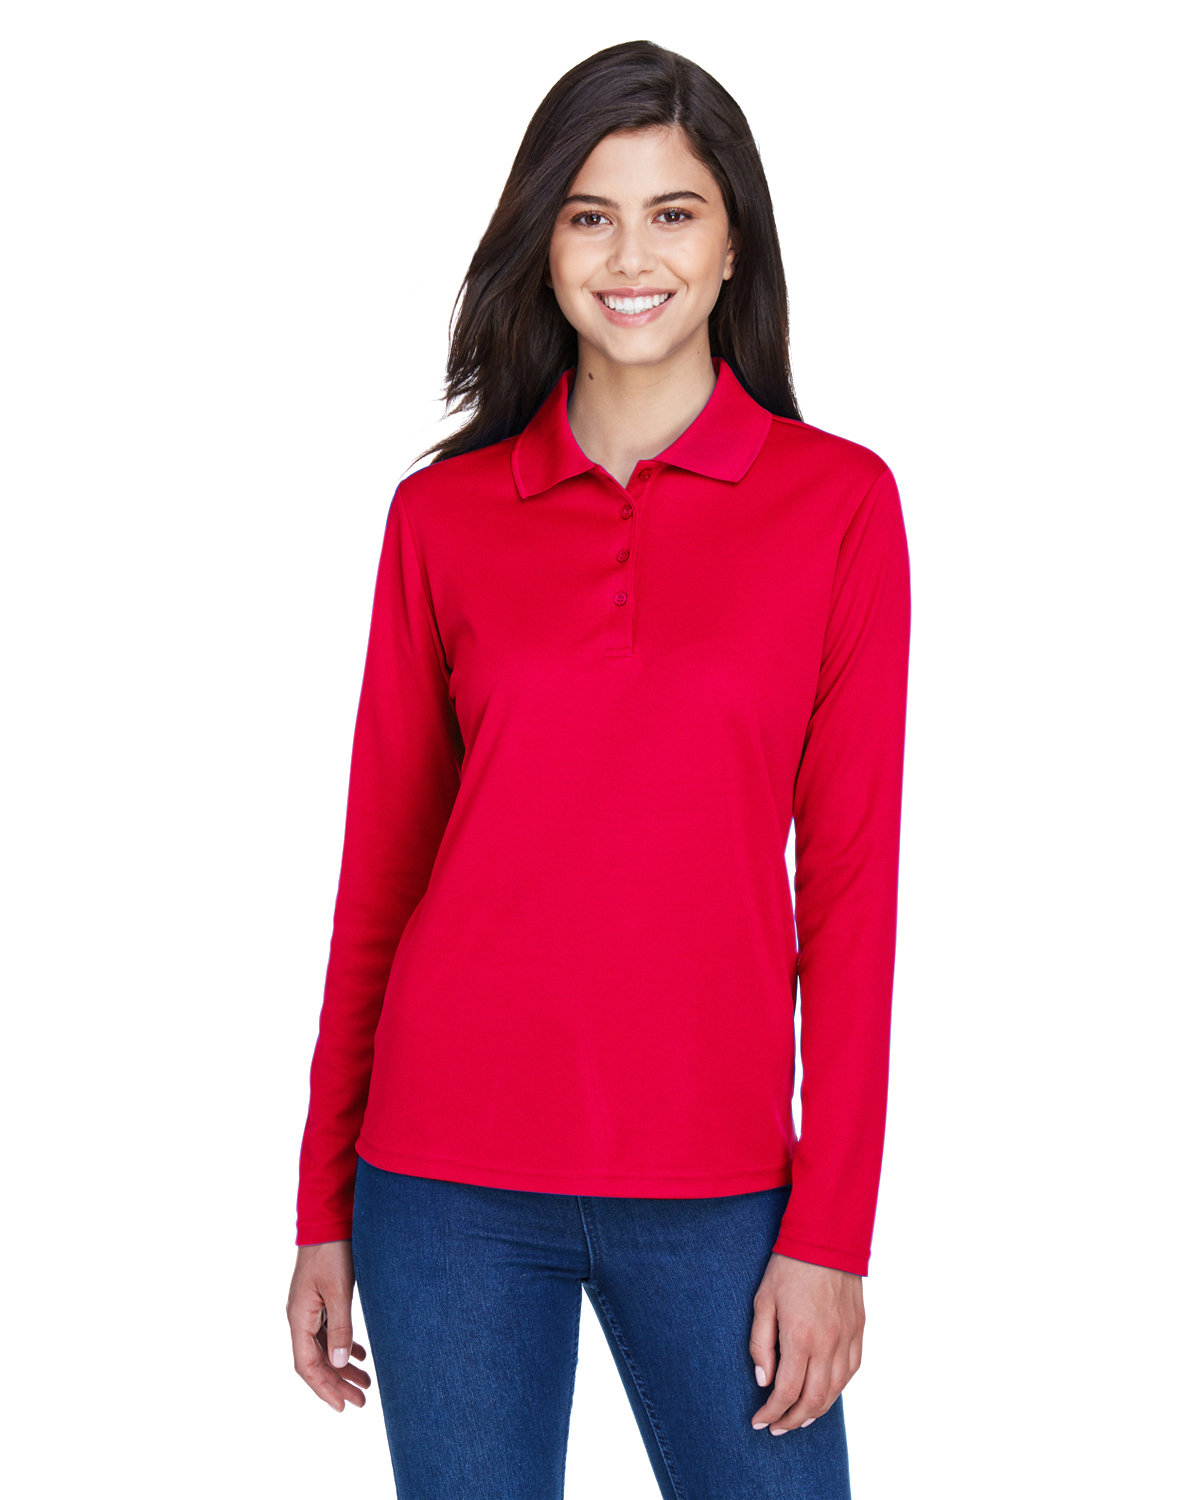 Core 365 Ladies' Pinnacle Performance Long-Sleeve Piqué Polo CLASSIC RED 